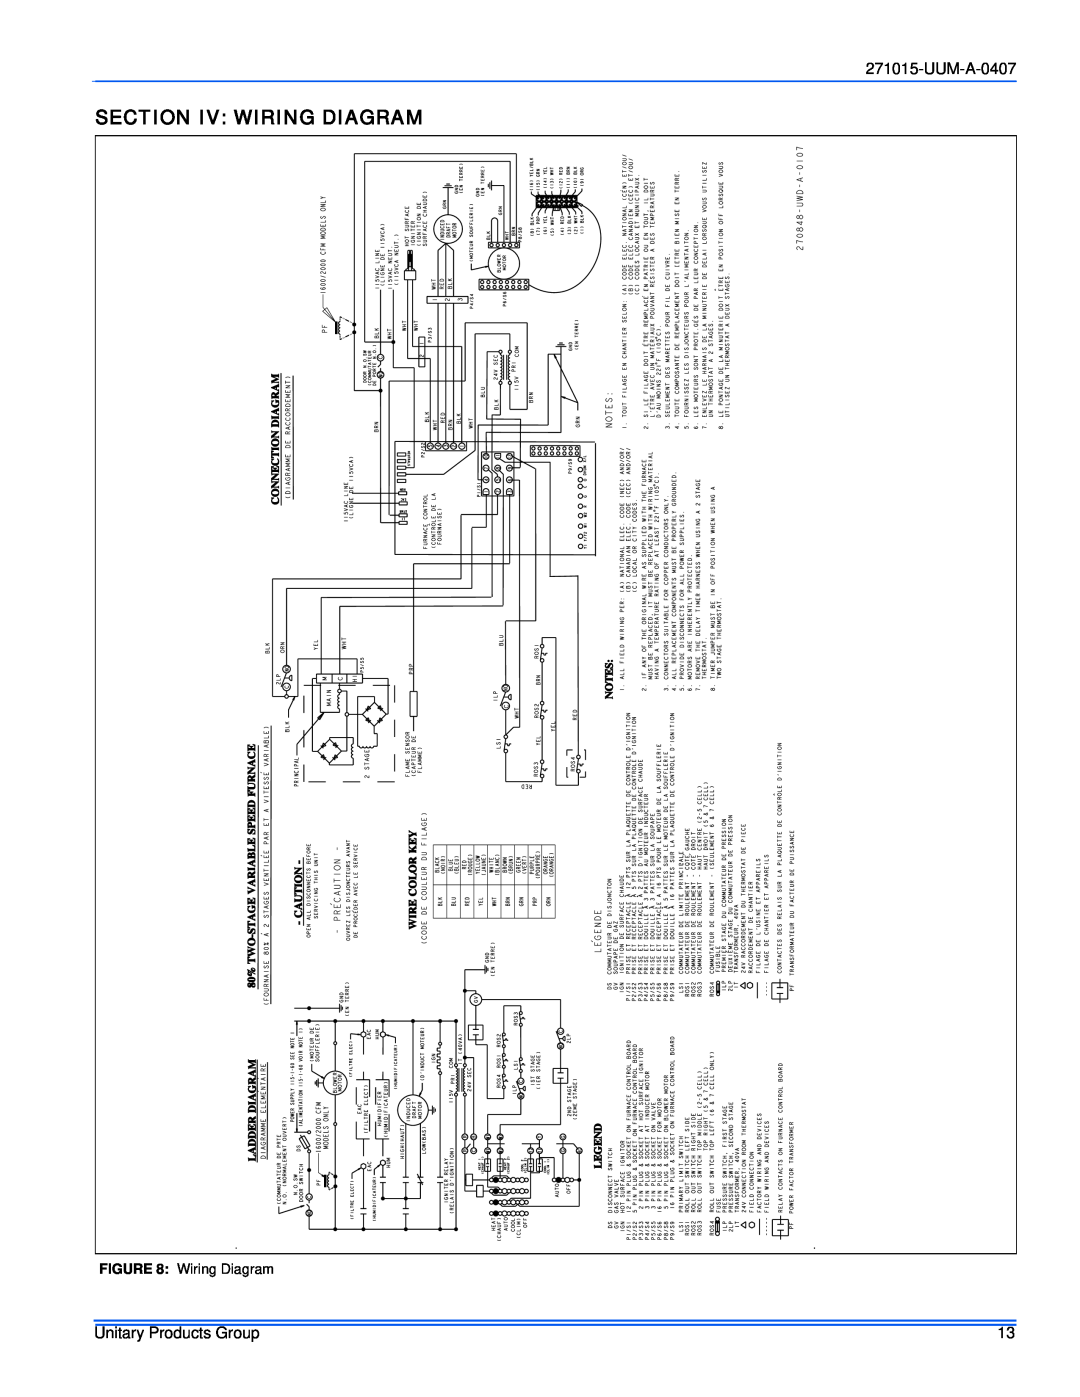 York LC8V*DH, PV8*DH, FC8V*DH, FL8V*DH, LL8V*DH service manual Section Iv Wiring Diagram, UUM-A-0407, Unitary Products Group 